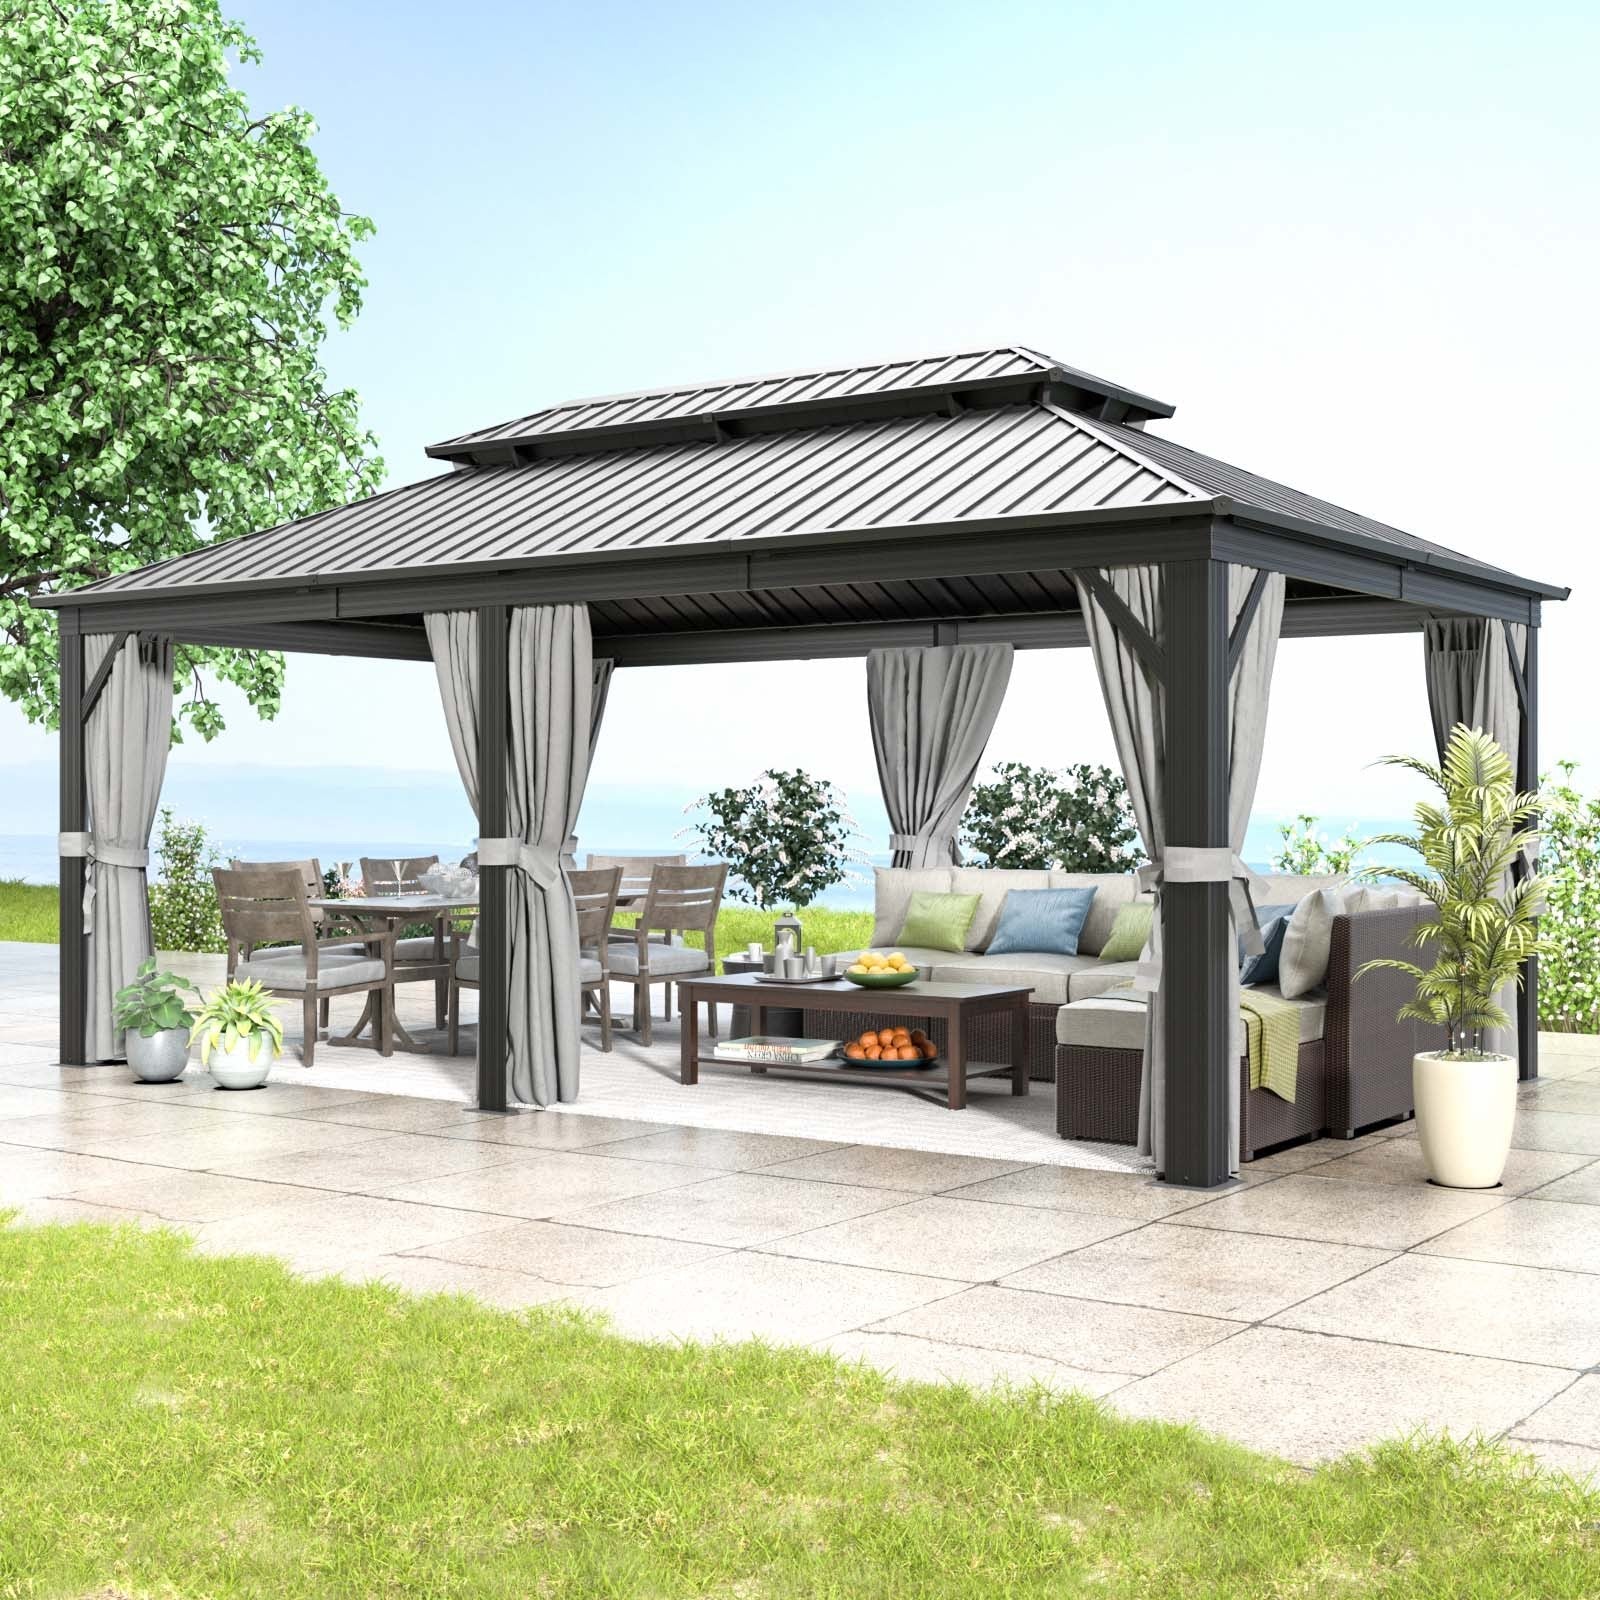 Galvanized Steel Roof Hardtop Gazebo, Vertical Line Double Roof, Aluminum Frame with Curtains and Netting